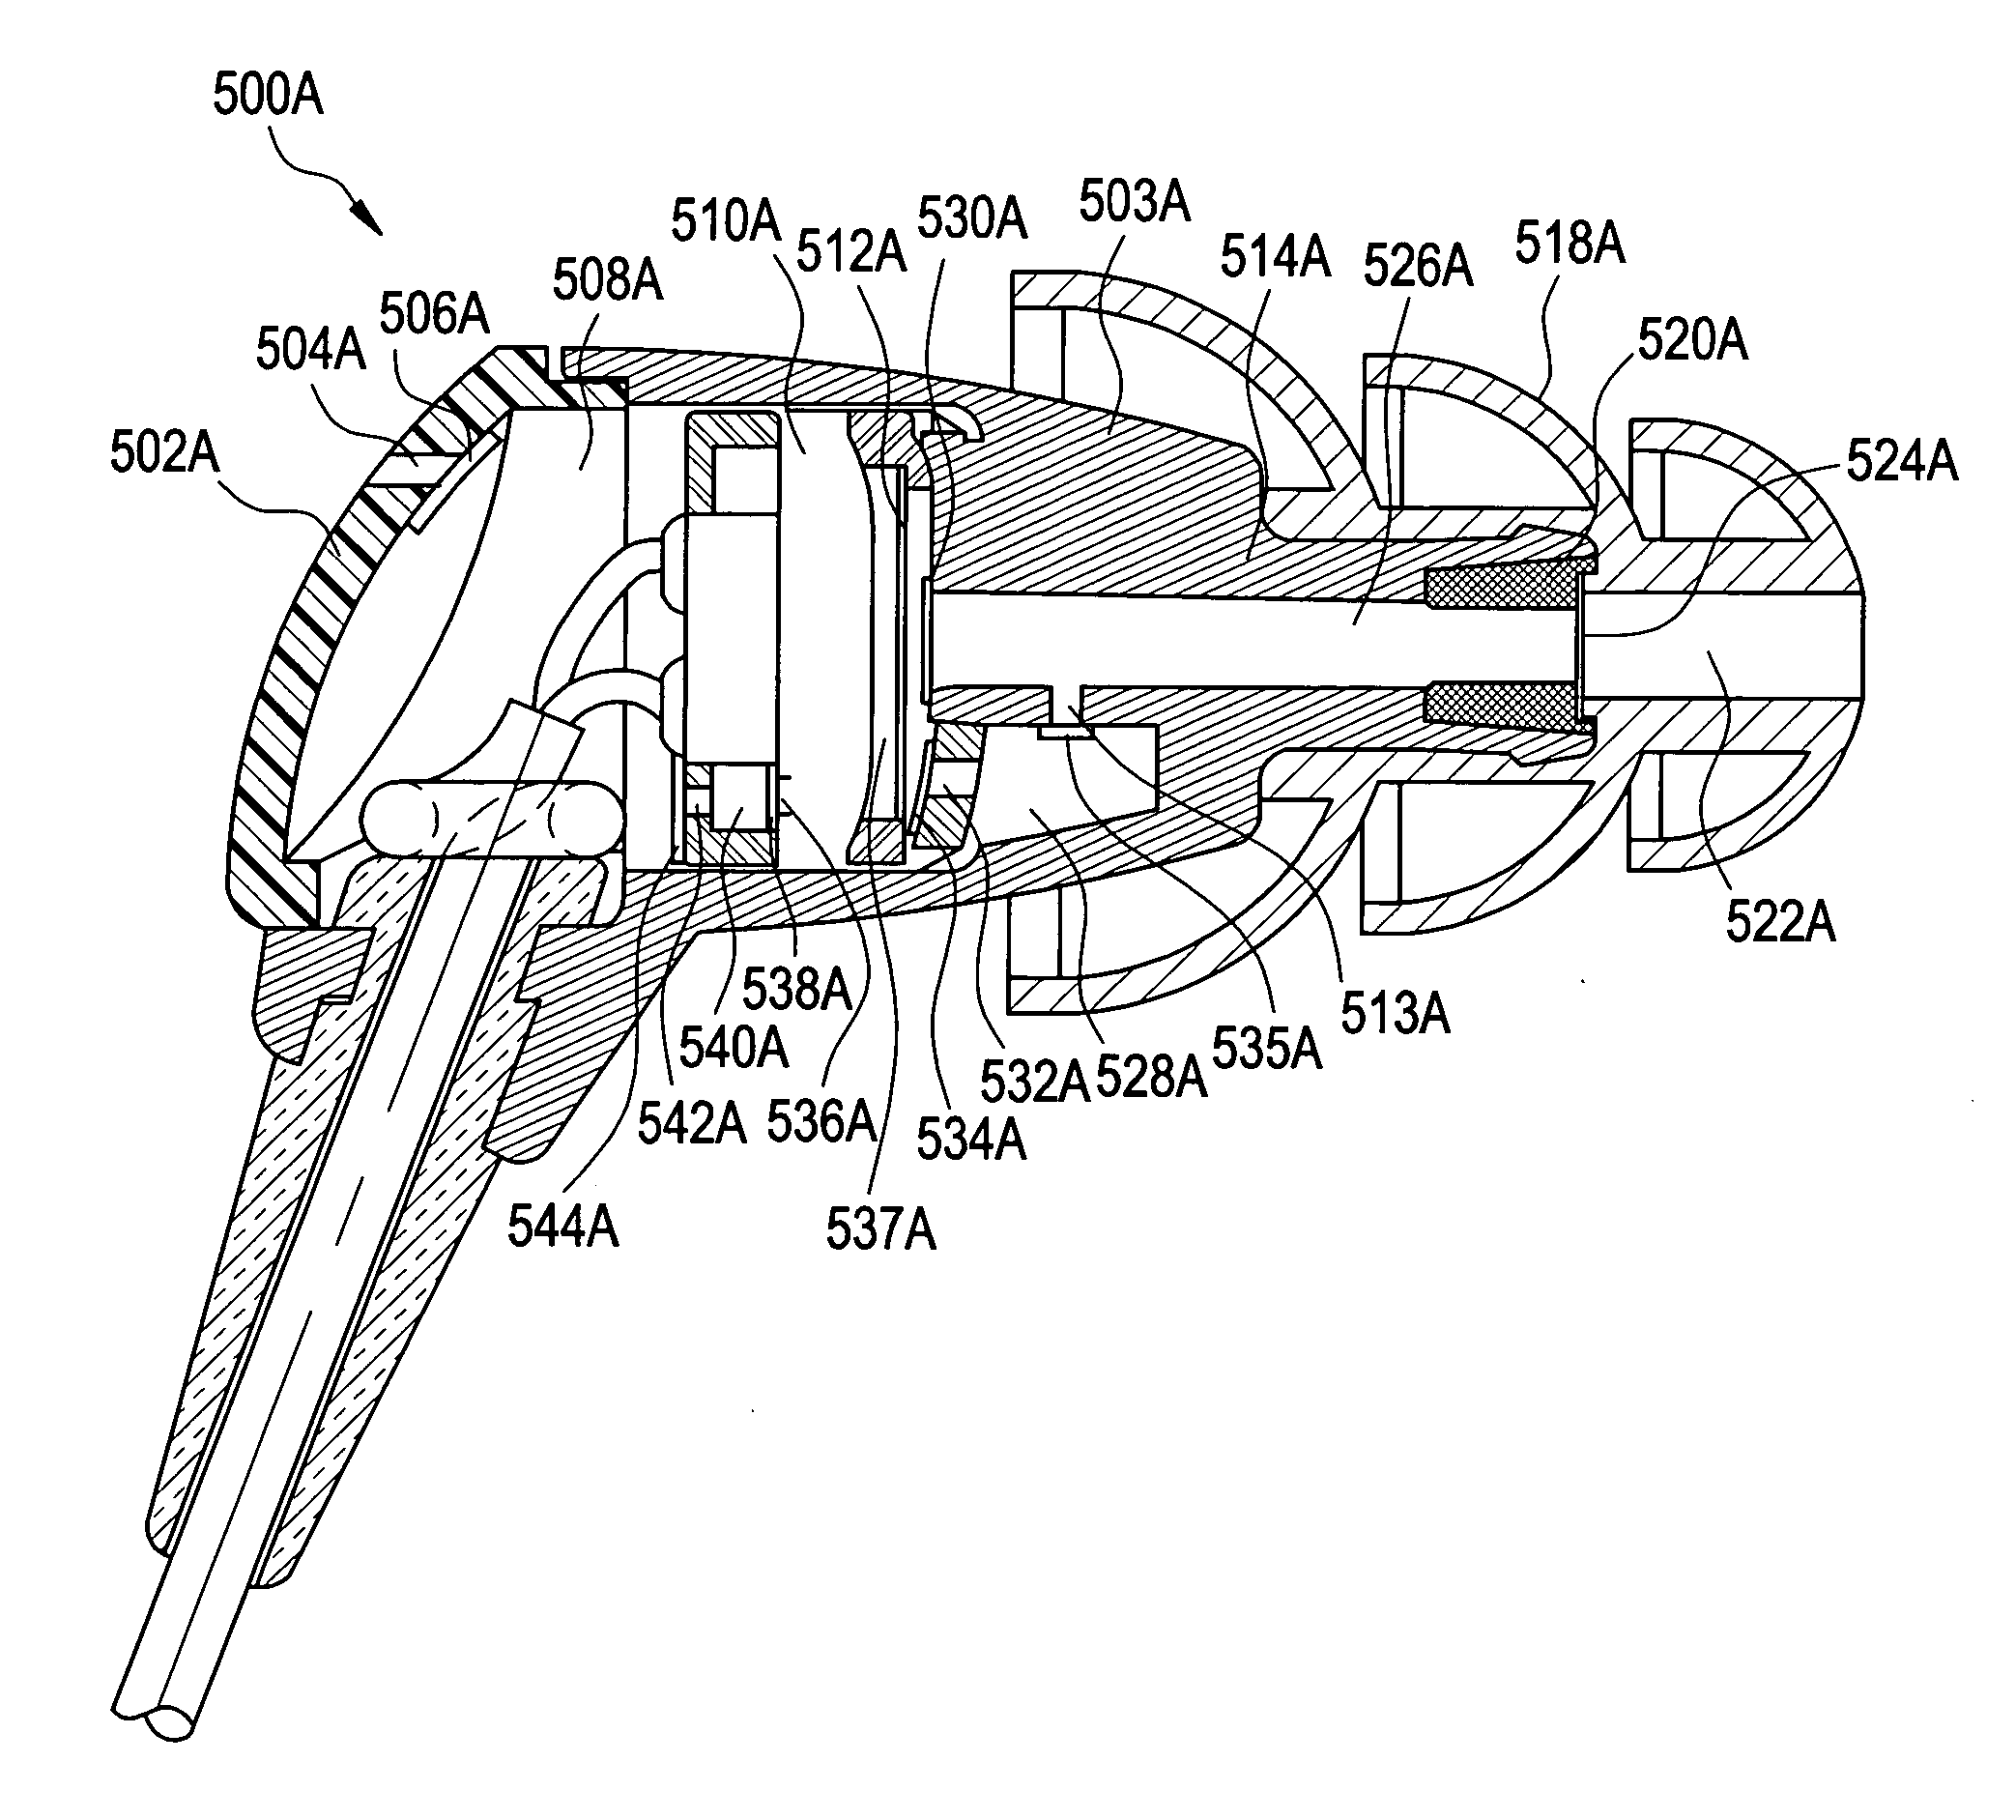 Insert earphone using a moving coil driver